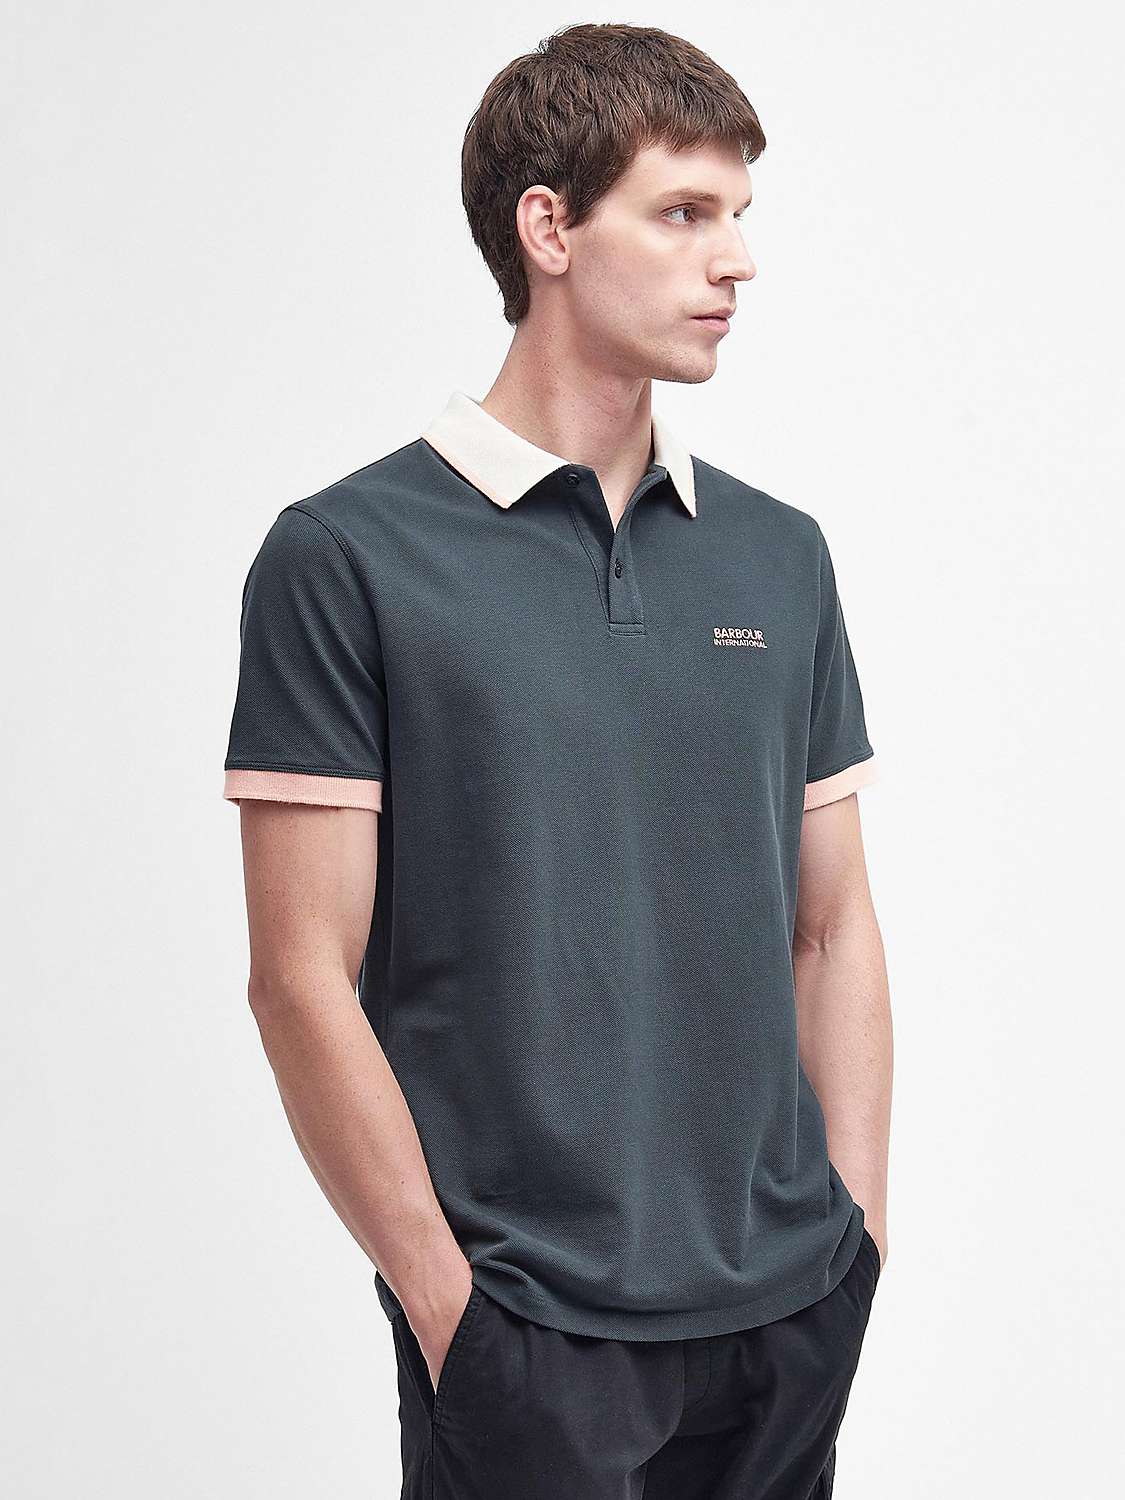 Buy Barbour International Howall Polo Shirt Online at johnlewis.com